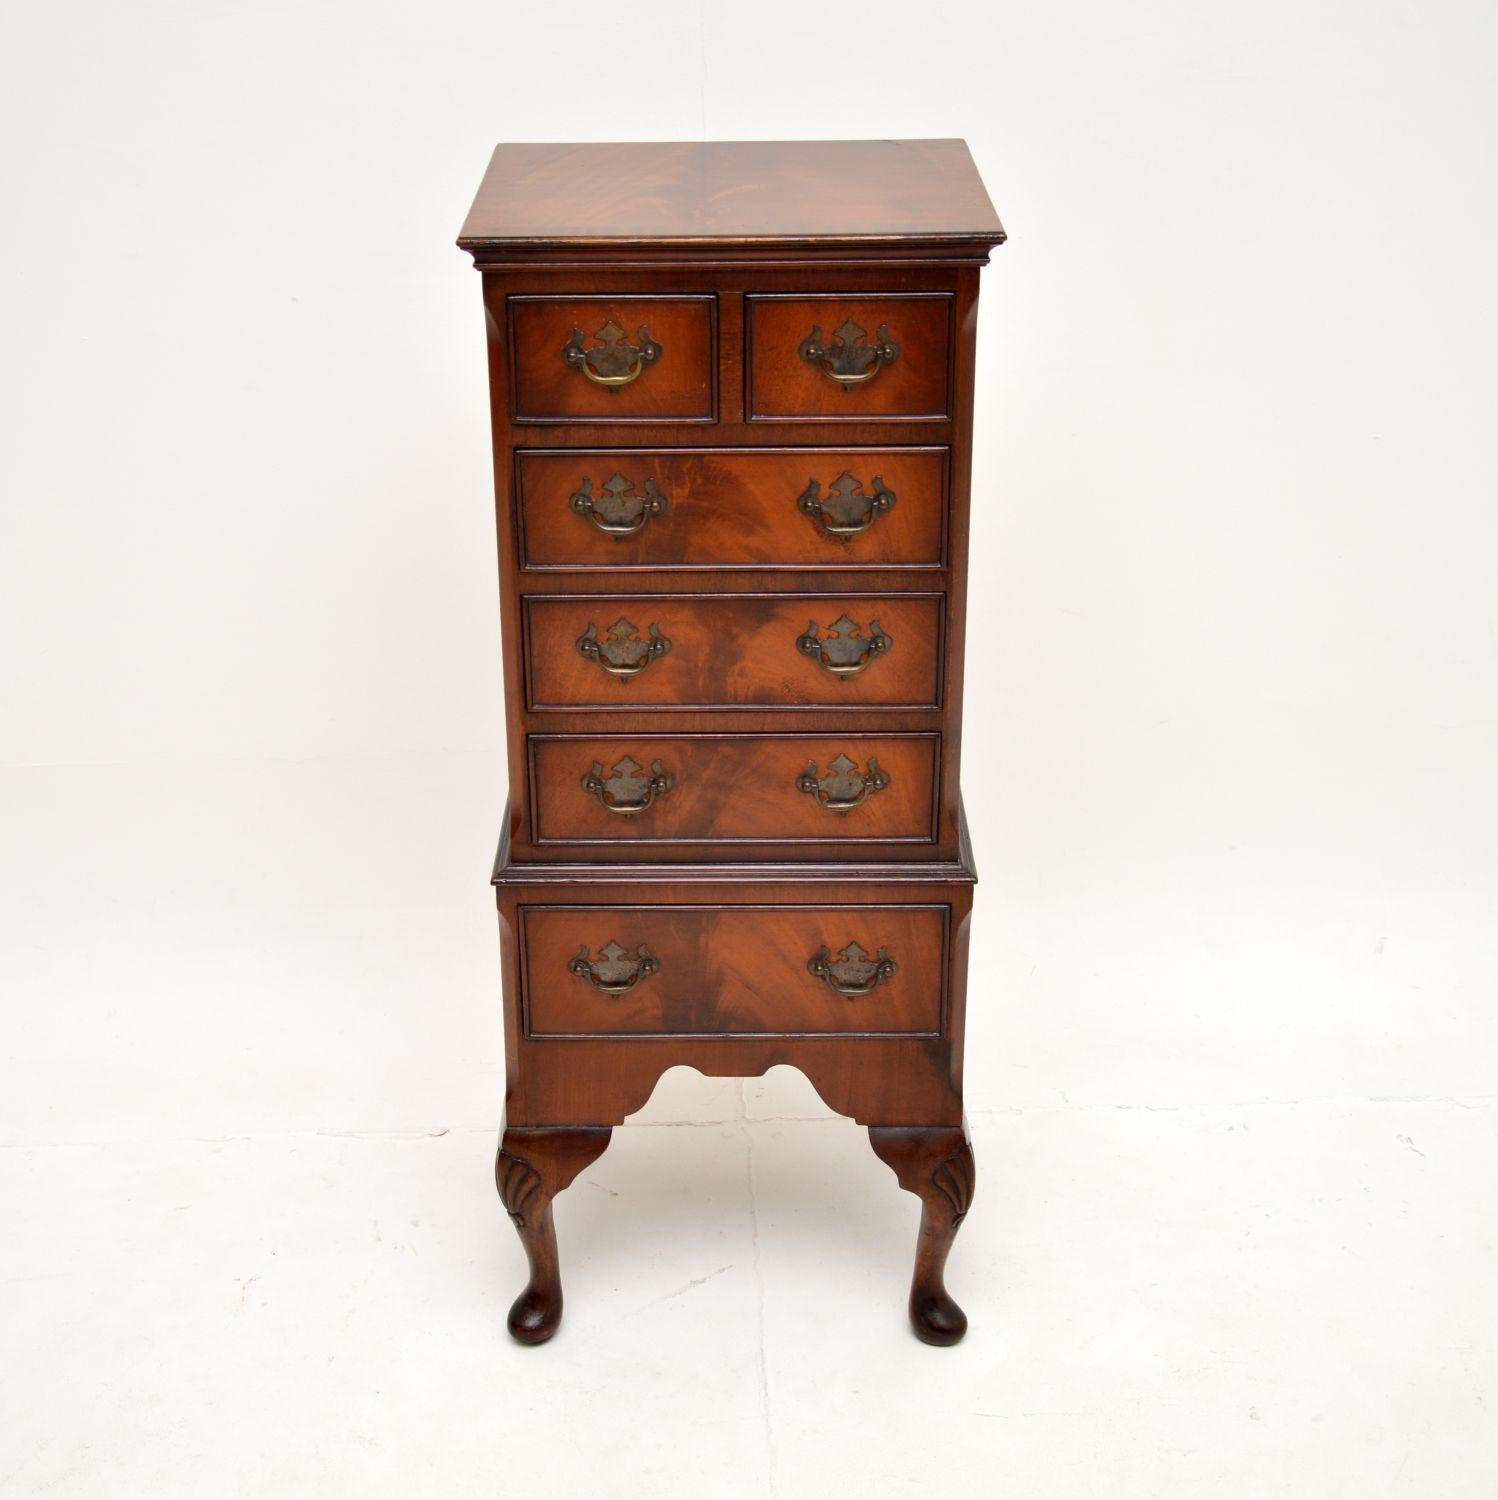 A smart and useful antique chest of drawers on legs. This was made in England, it dates from around the 1930-50’s.

It is a very useful size, it is slim and taking up very little space, yet offering plenty of storage in the many drawers. The wood